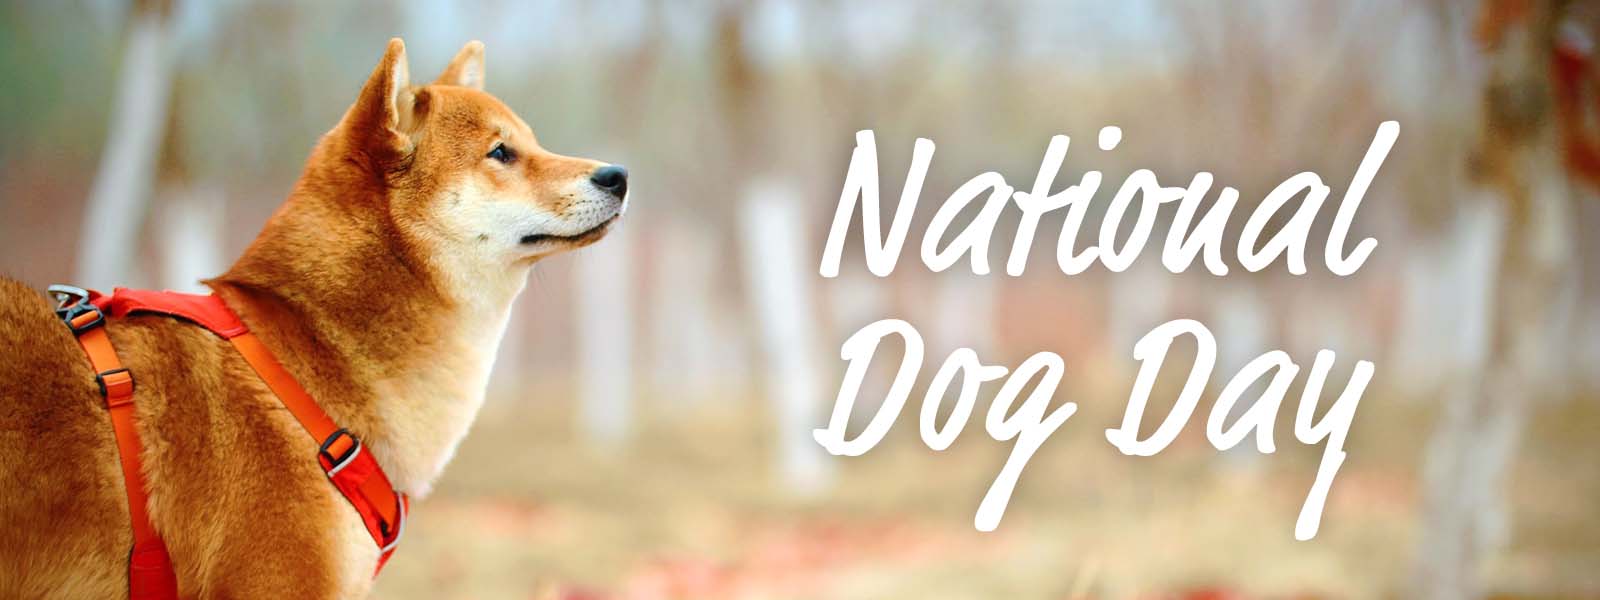 Happy National Dog Day! Here are Some Tips to Keep Your Dog Busy While